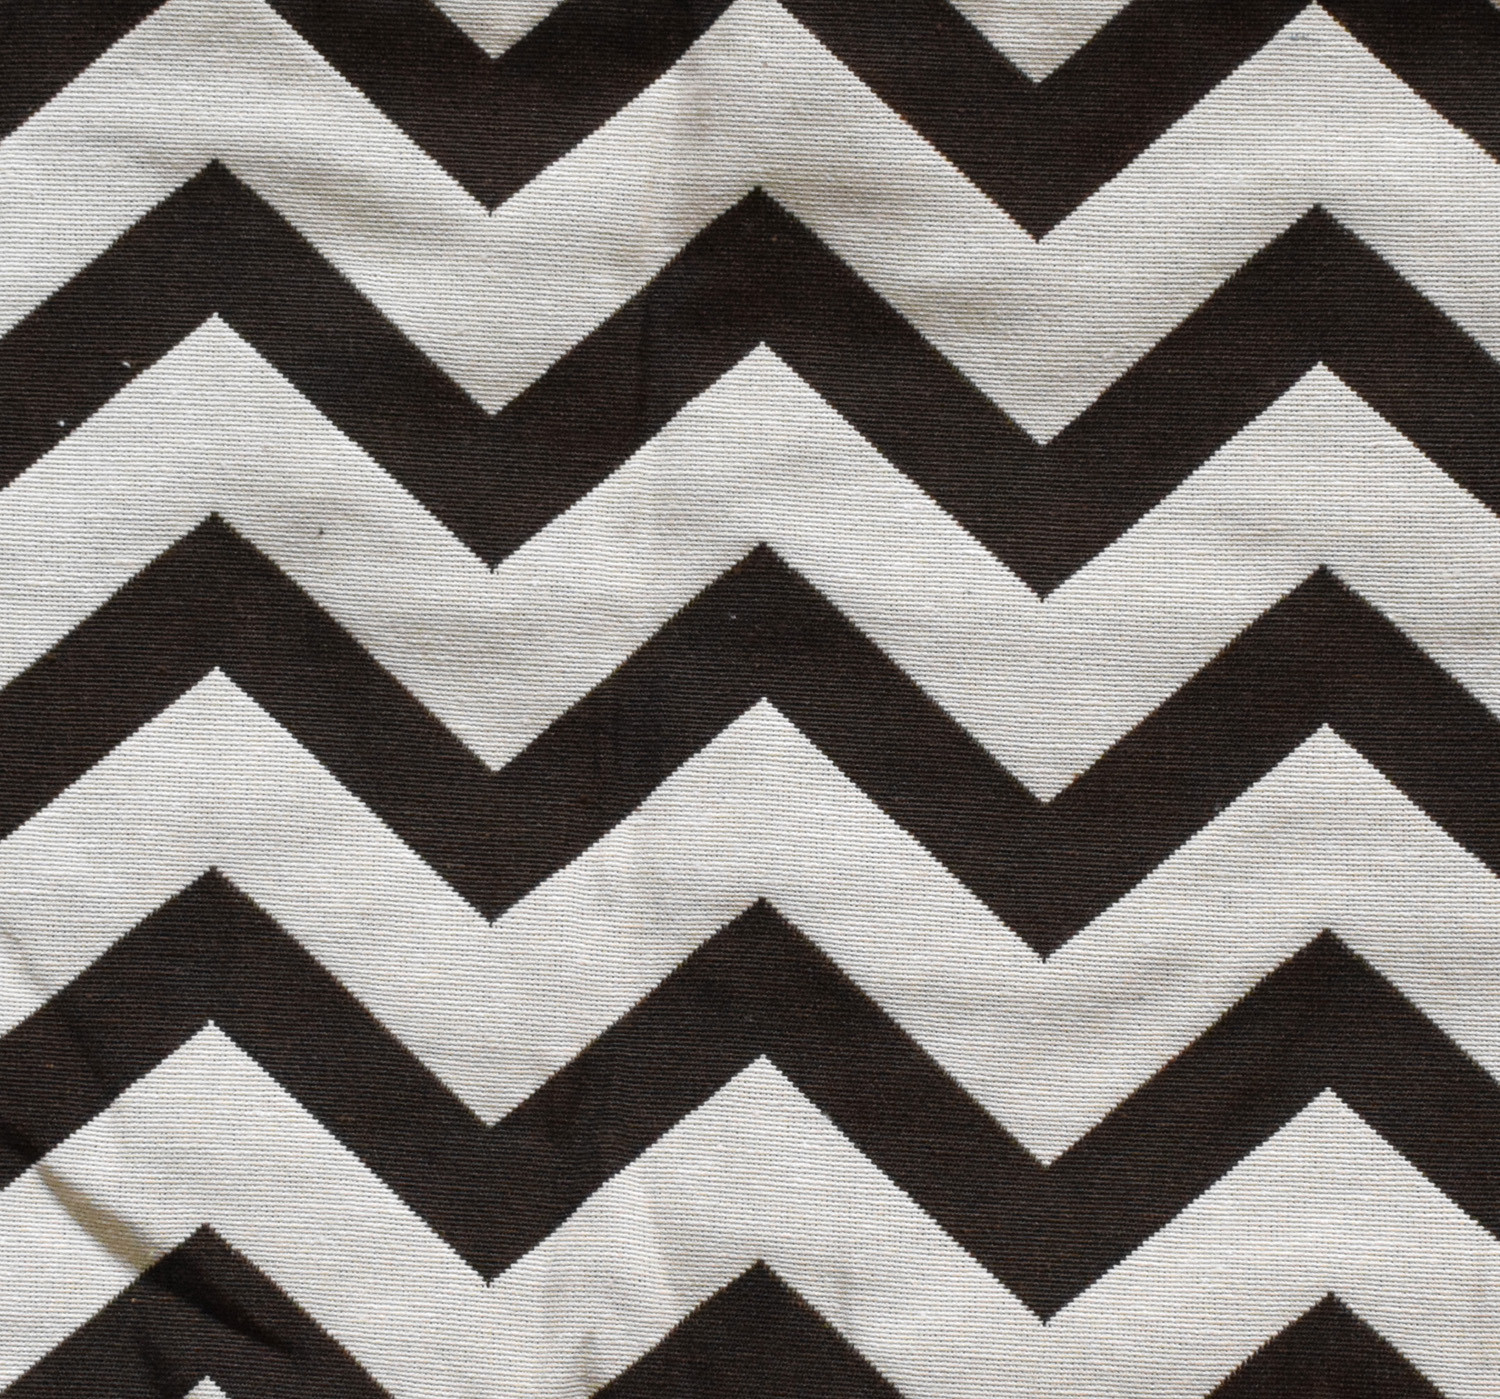 Kuber Industries Cotton Zig Zag Print 6 Seater Dining Table Cover/Table Cloth For Home & Dining Table (Brown) 54KM4374